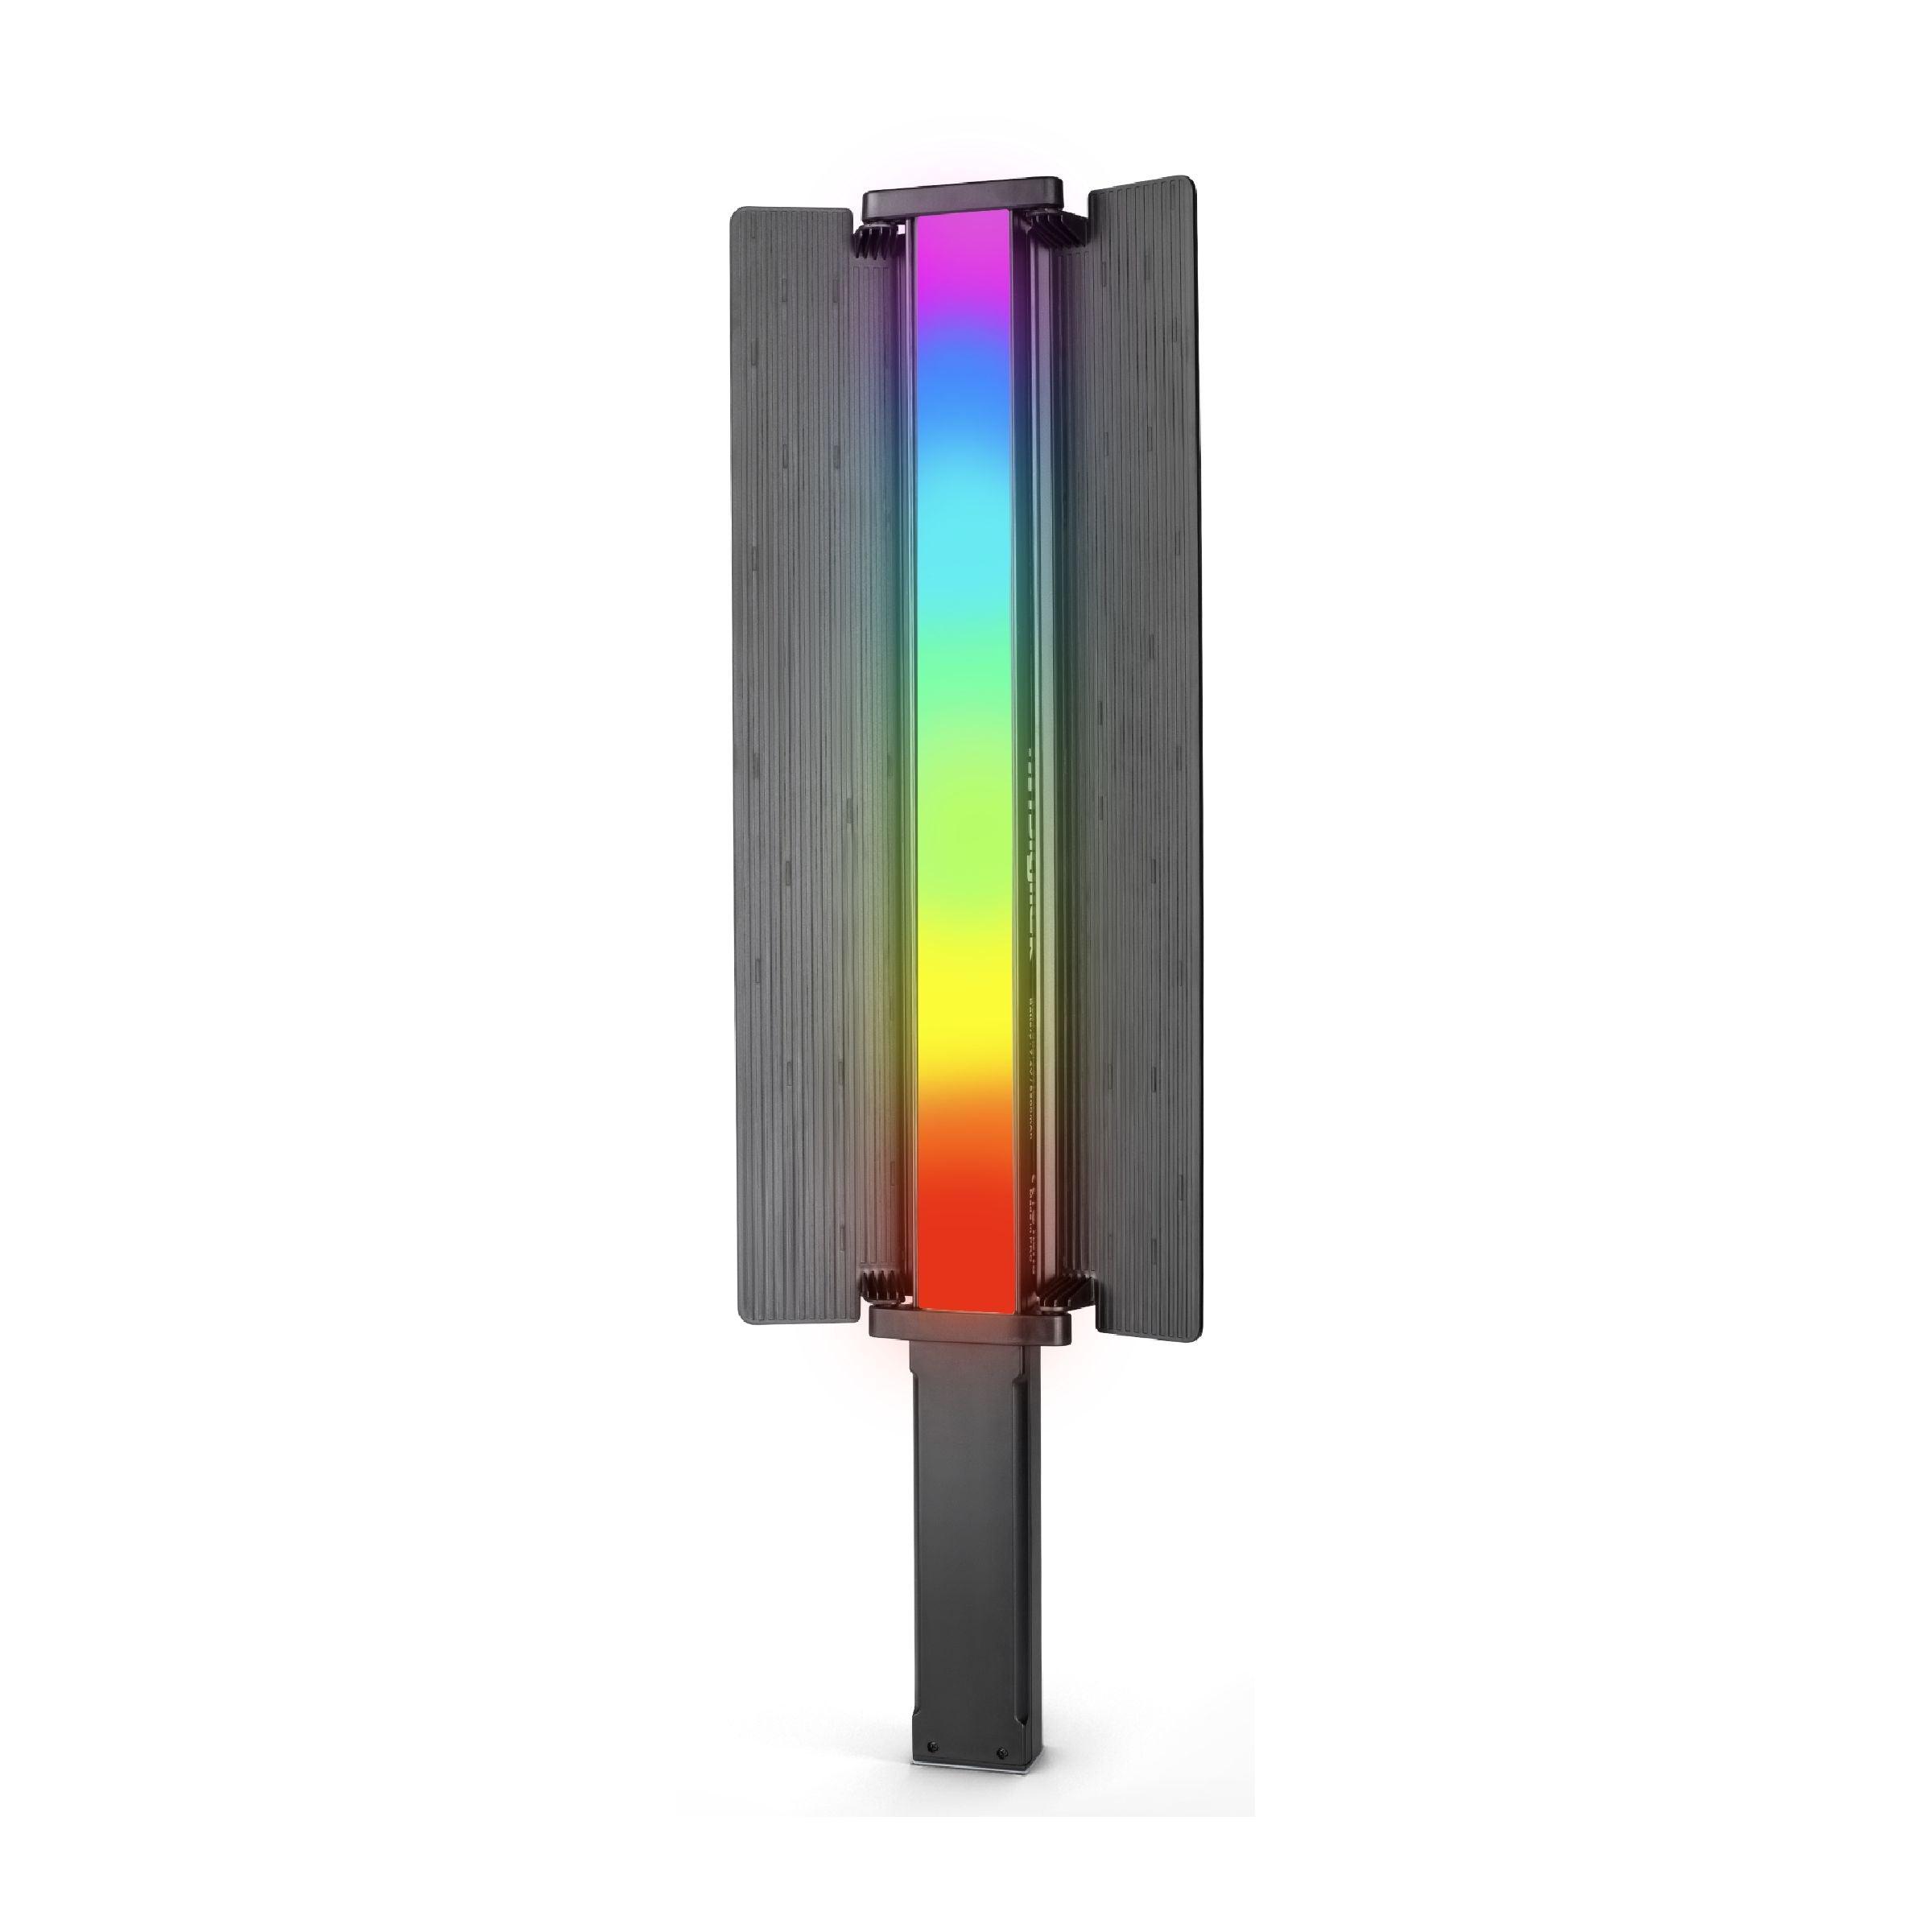 Digitek (DSL-30W RGB) Portable Handheld RGB LED Light Wand with Grid, Diffuser & Barn Door Comes with a 5200mAh Built in Battery Pack. - Digitek